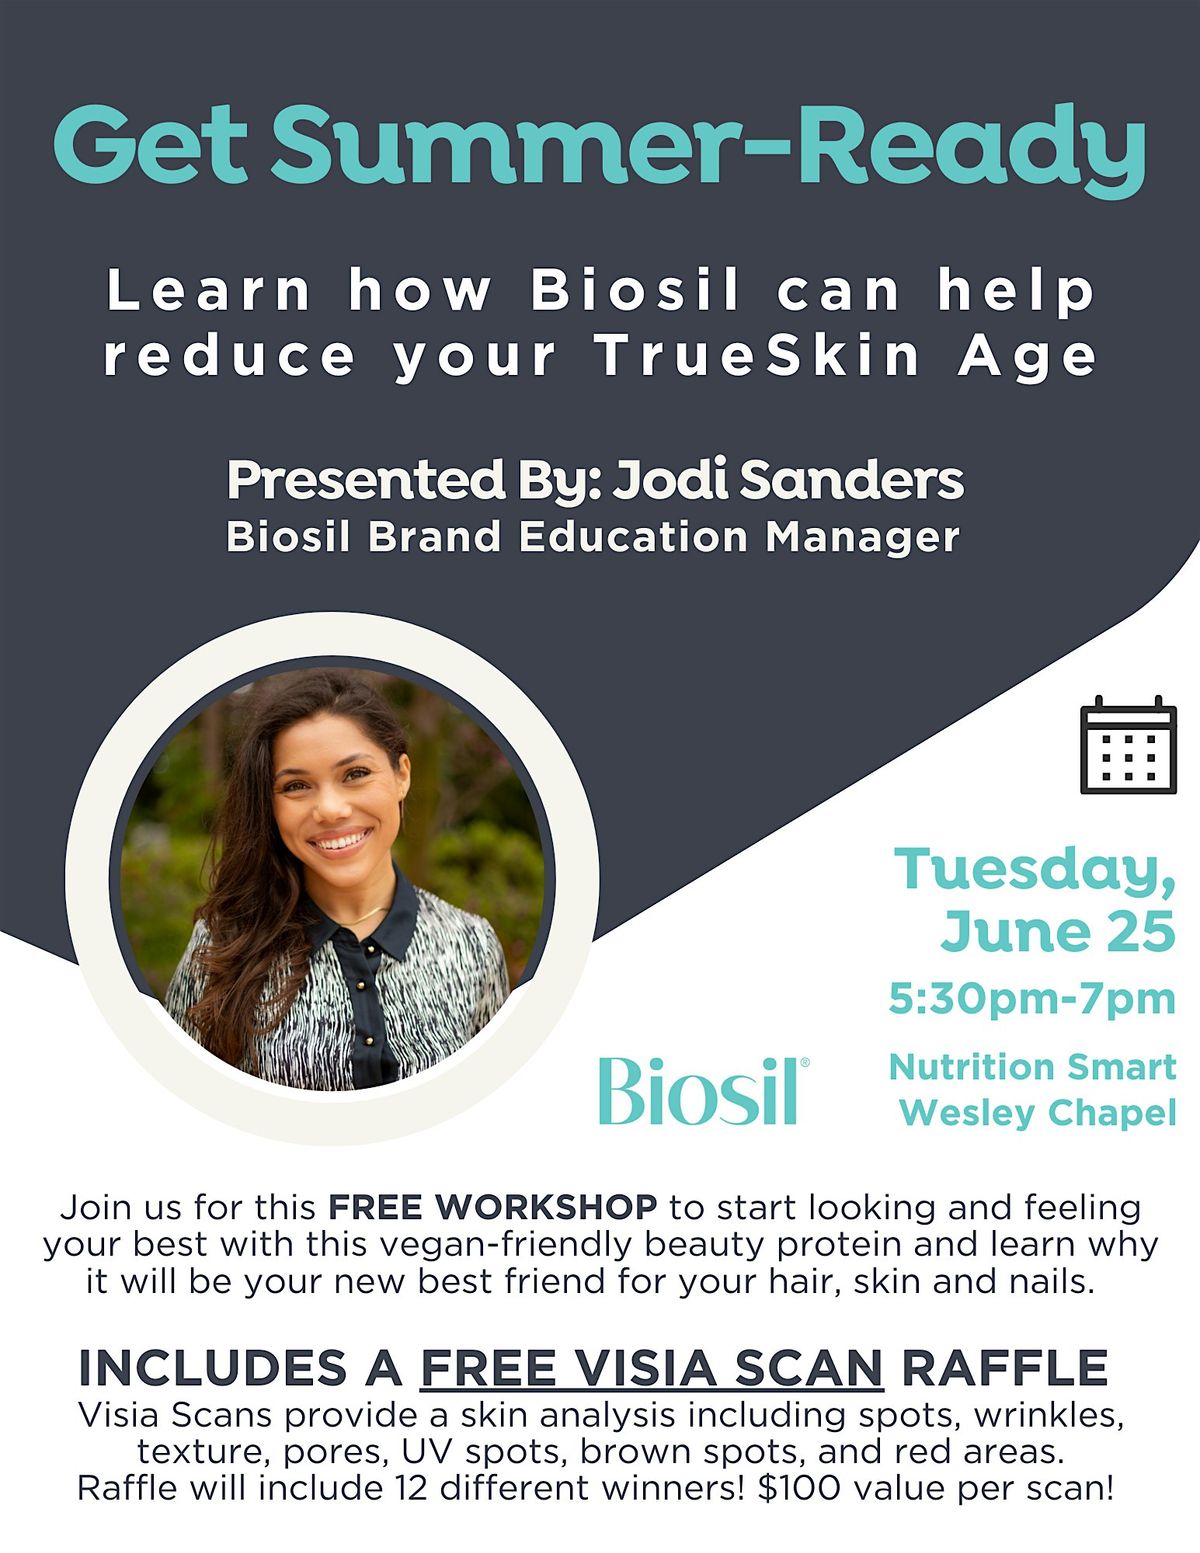 Reduce Your TrueSkin Age with Biosil